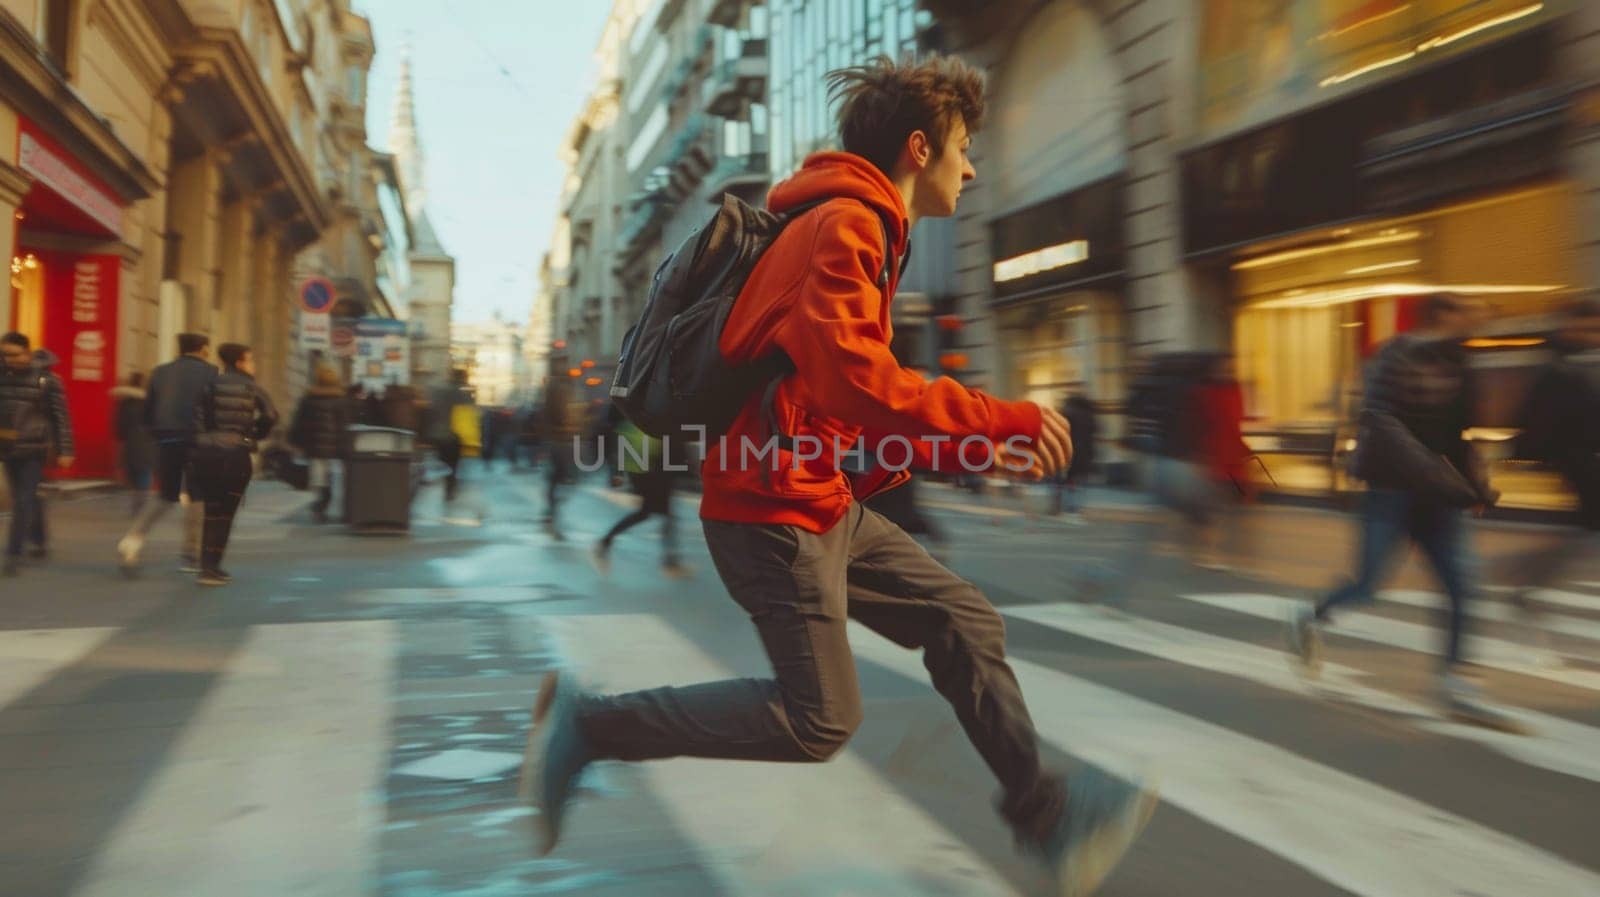 A man in red jacket running down a city street with people walking, AI by starush